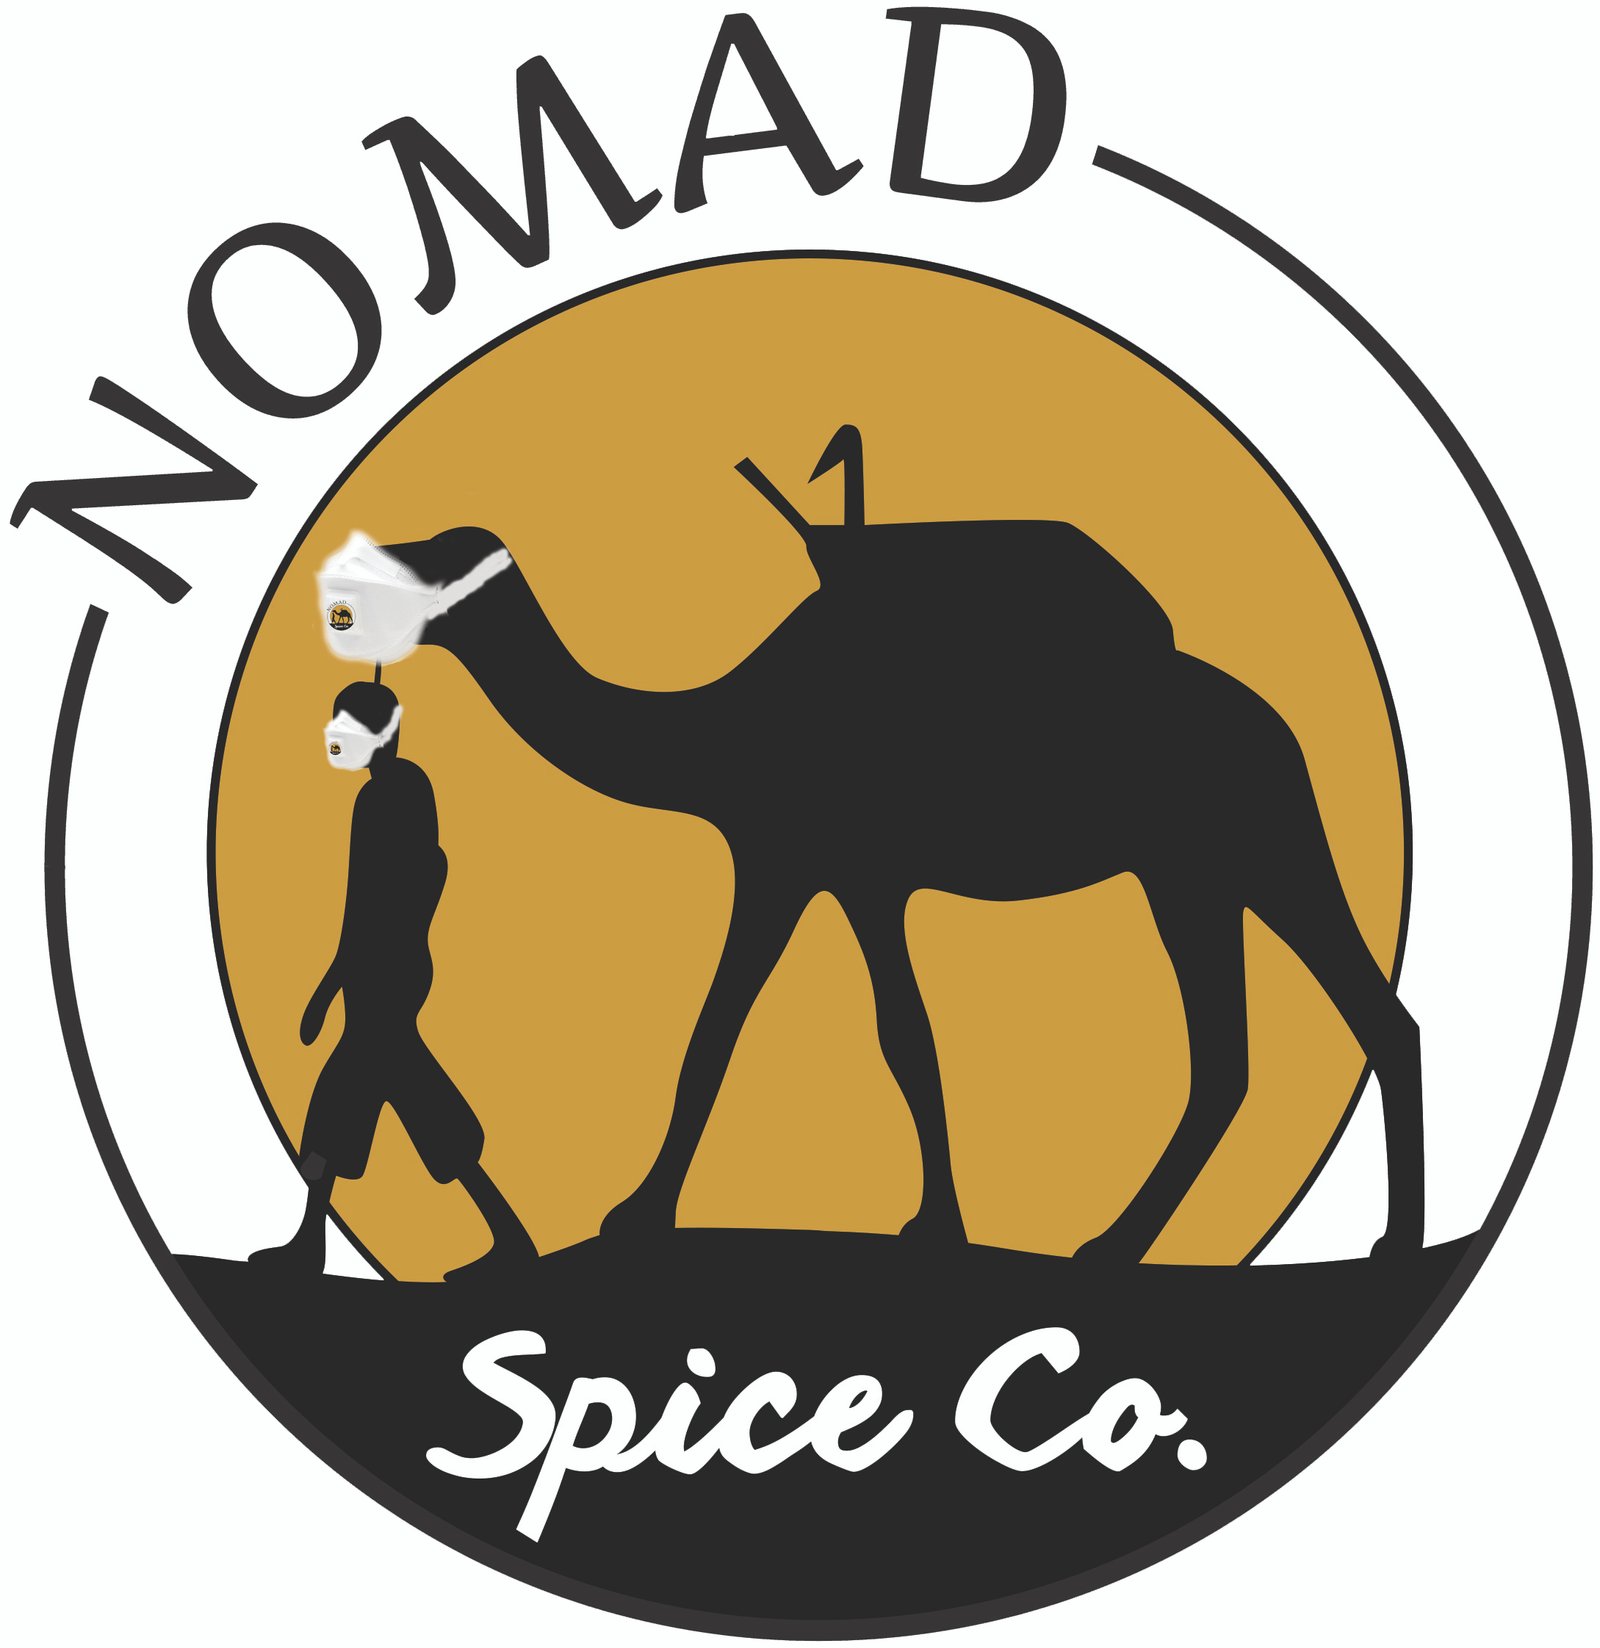 Nomad Spice Co.